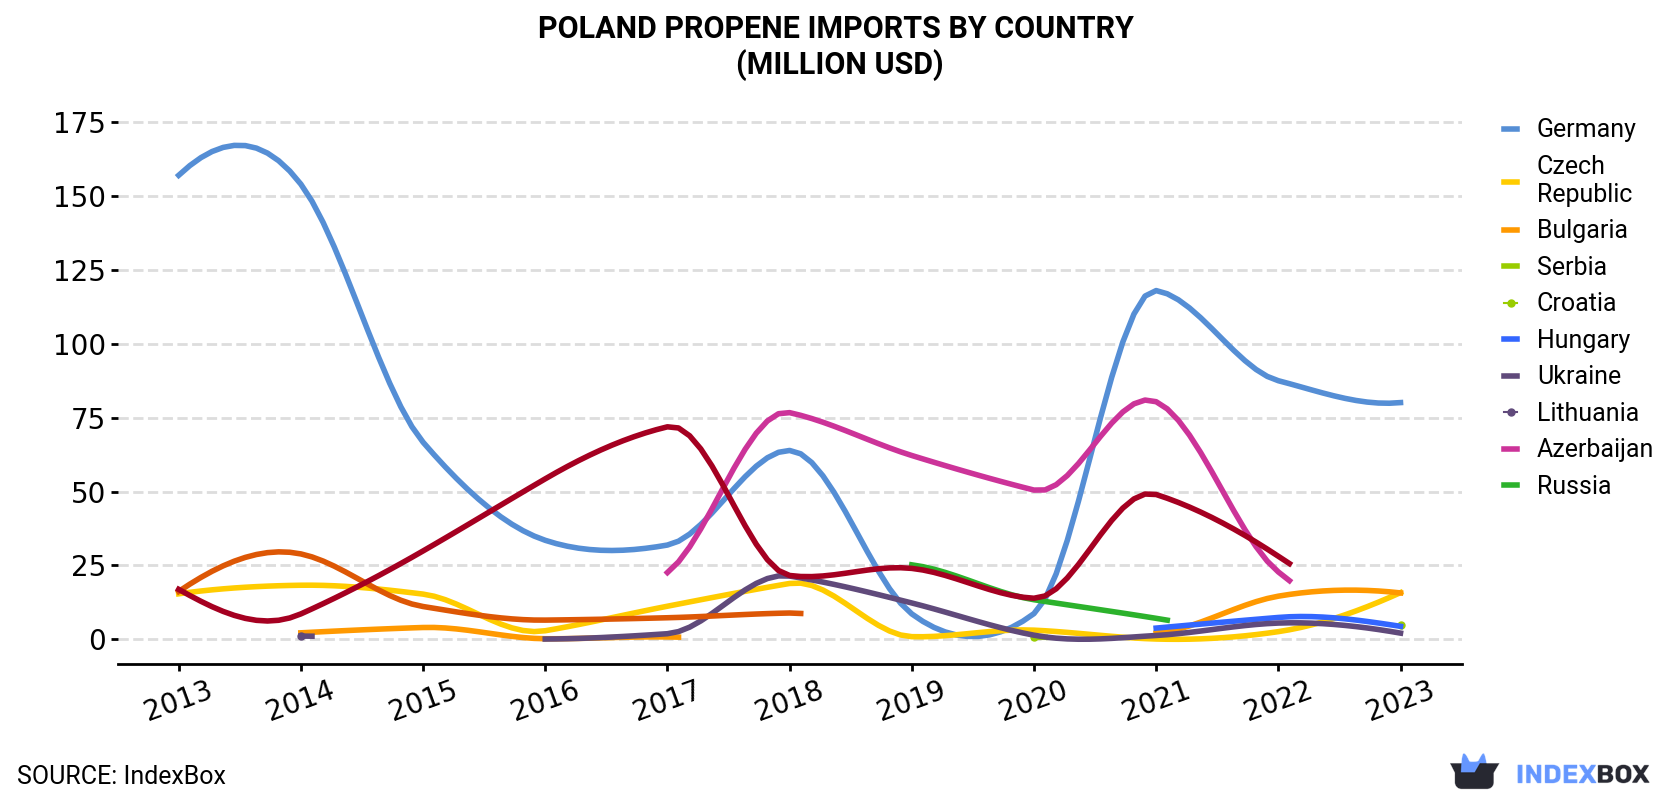 Poland Propene Imports By Country (Million USD)